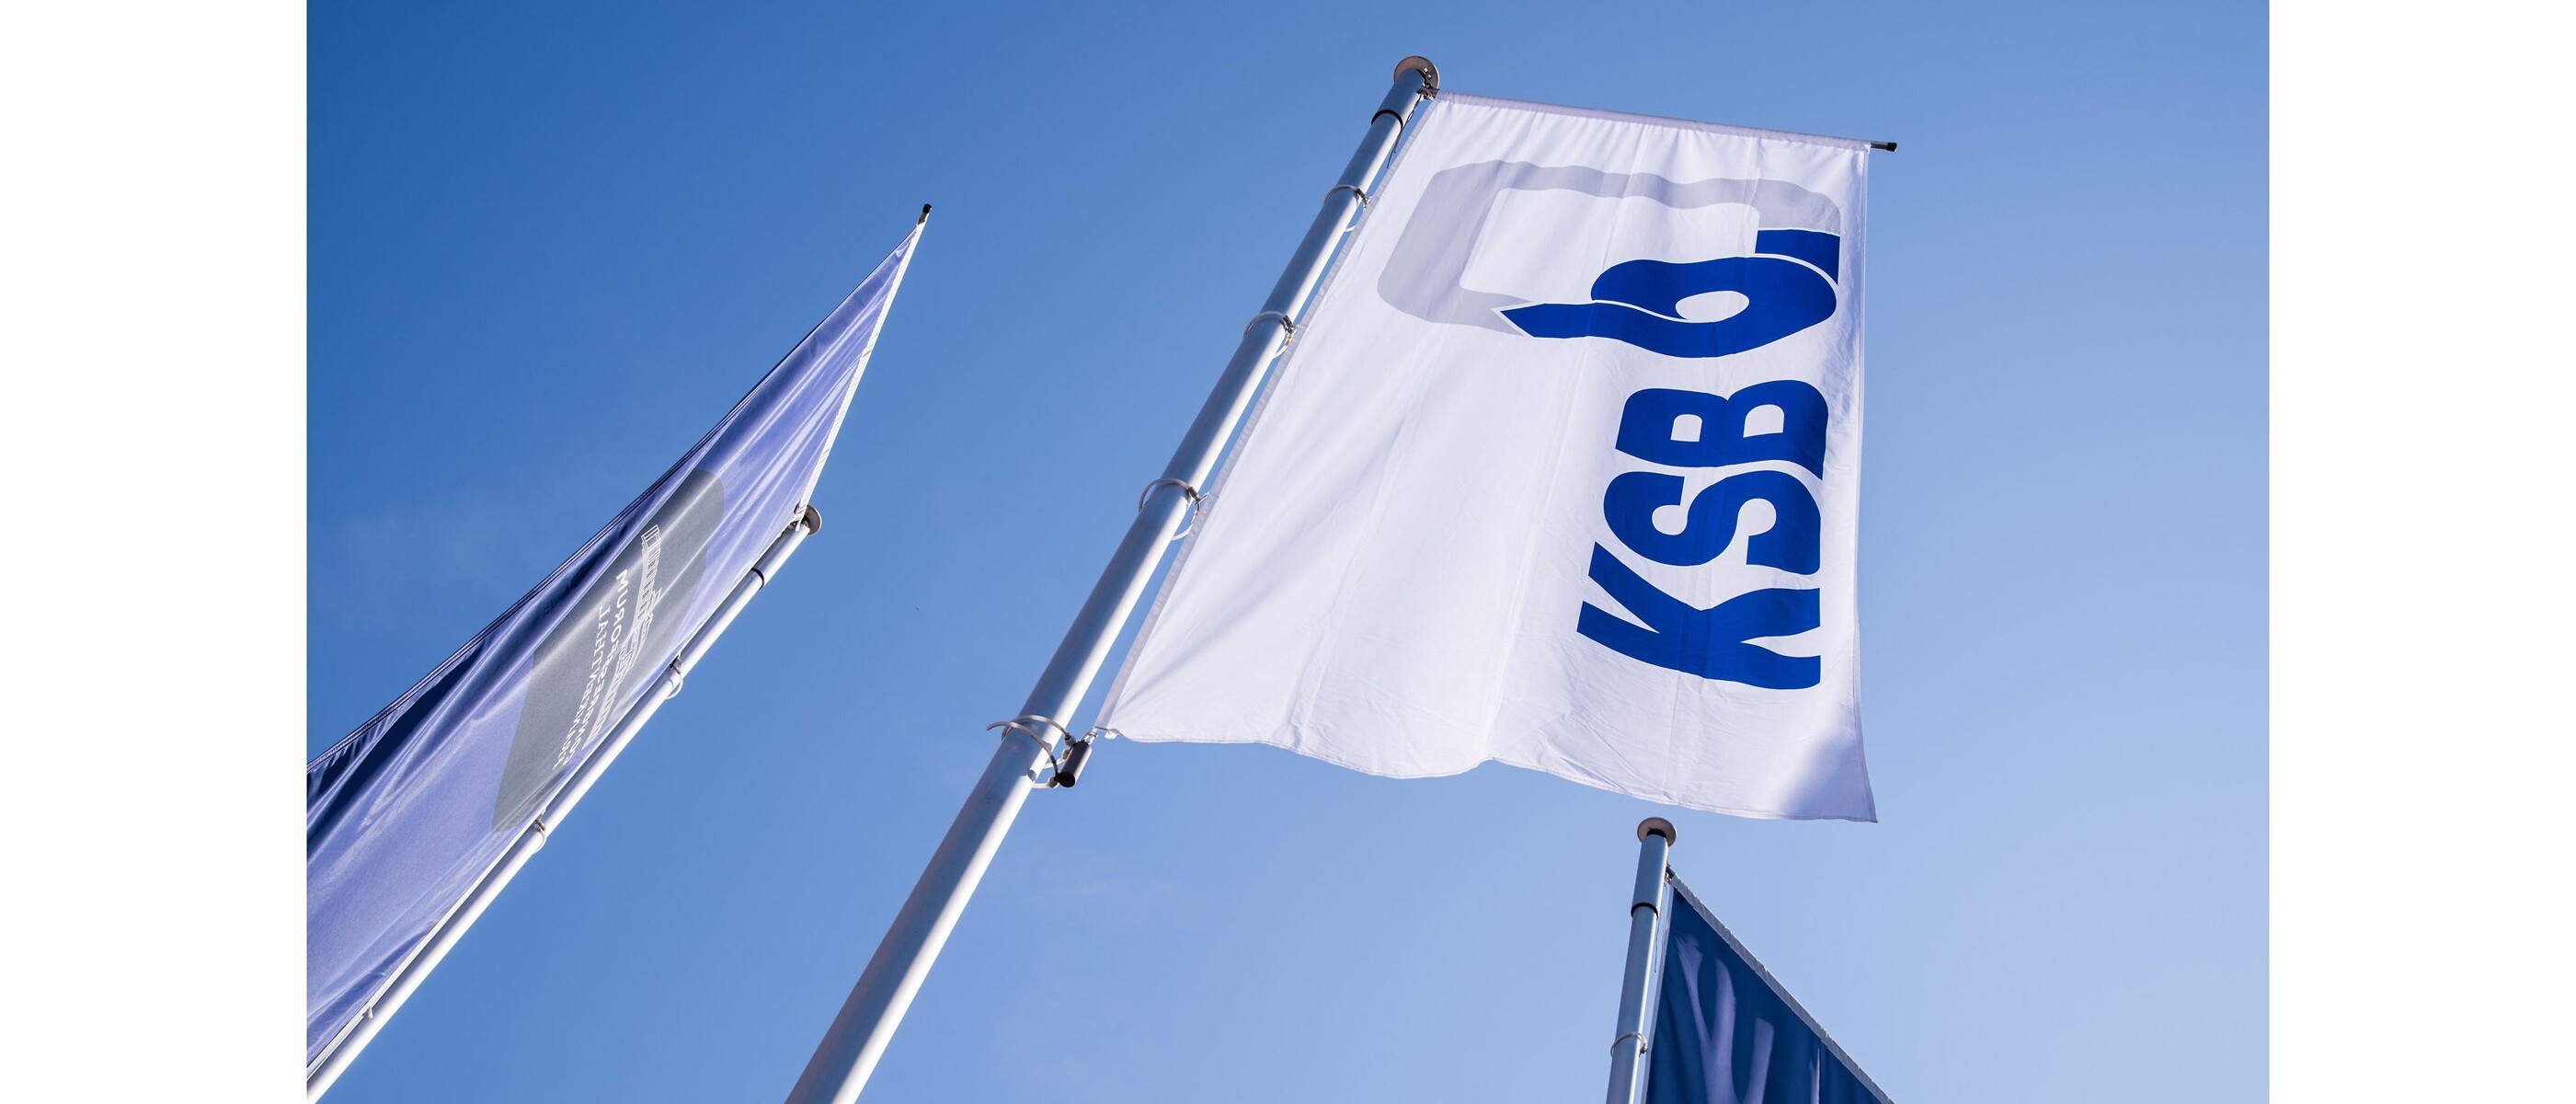 KSB flags and blue sky